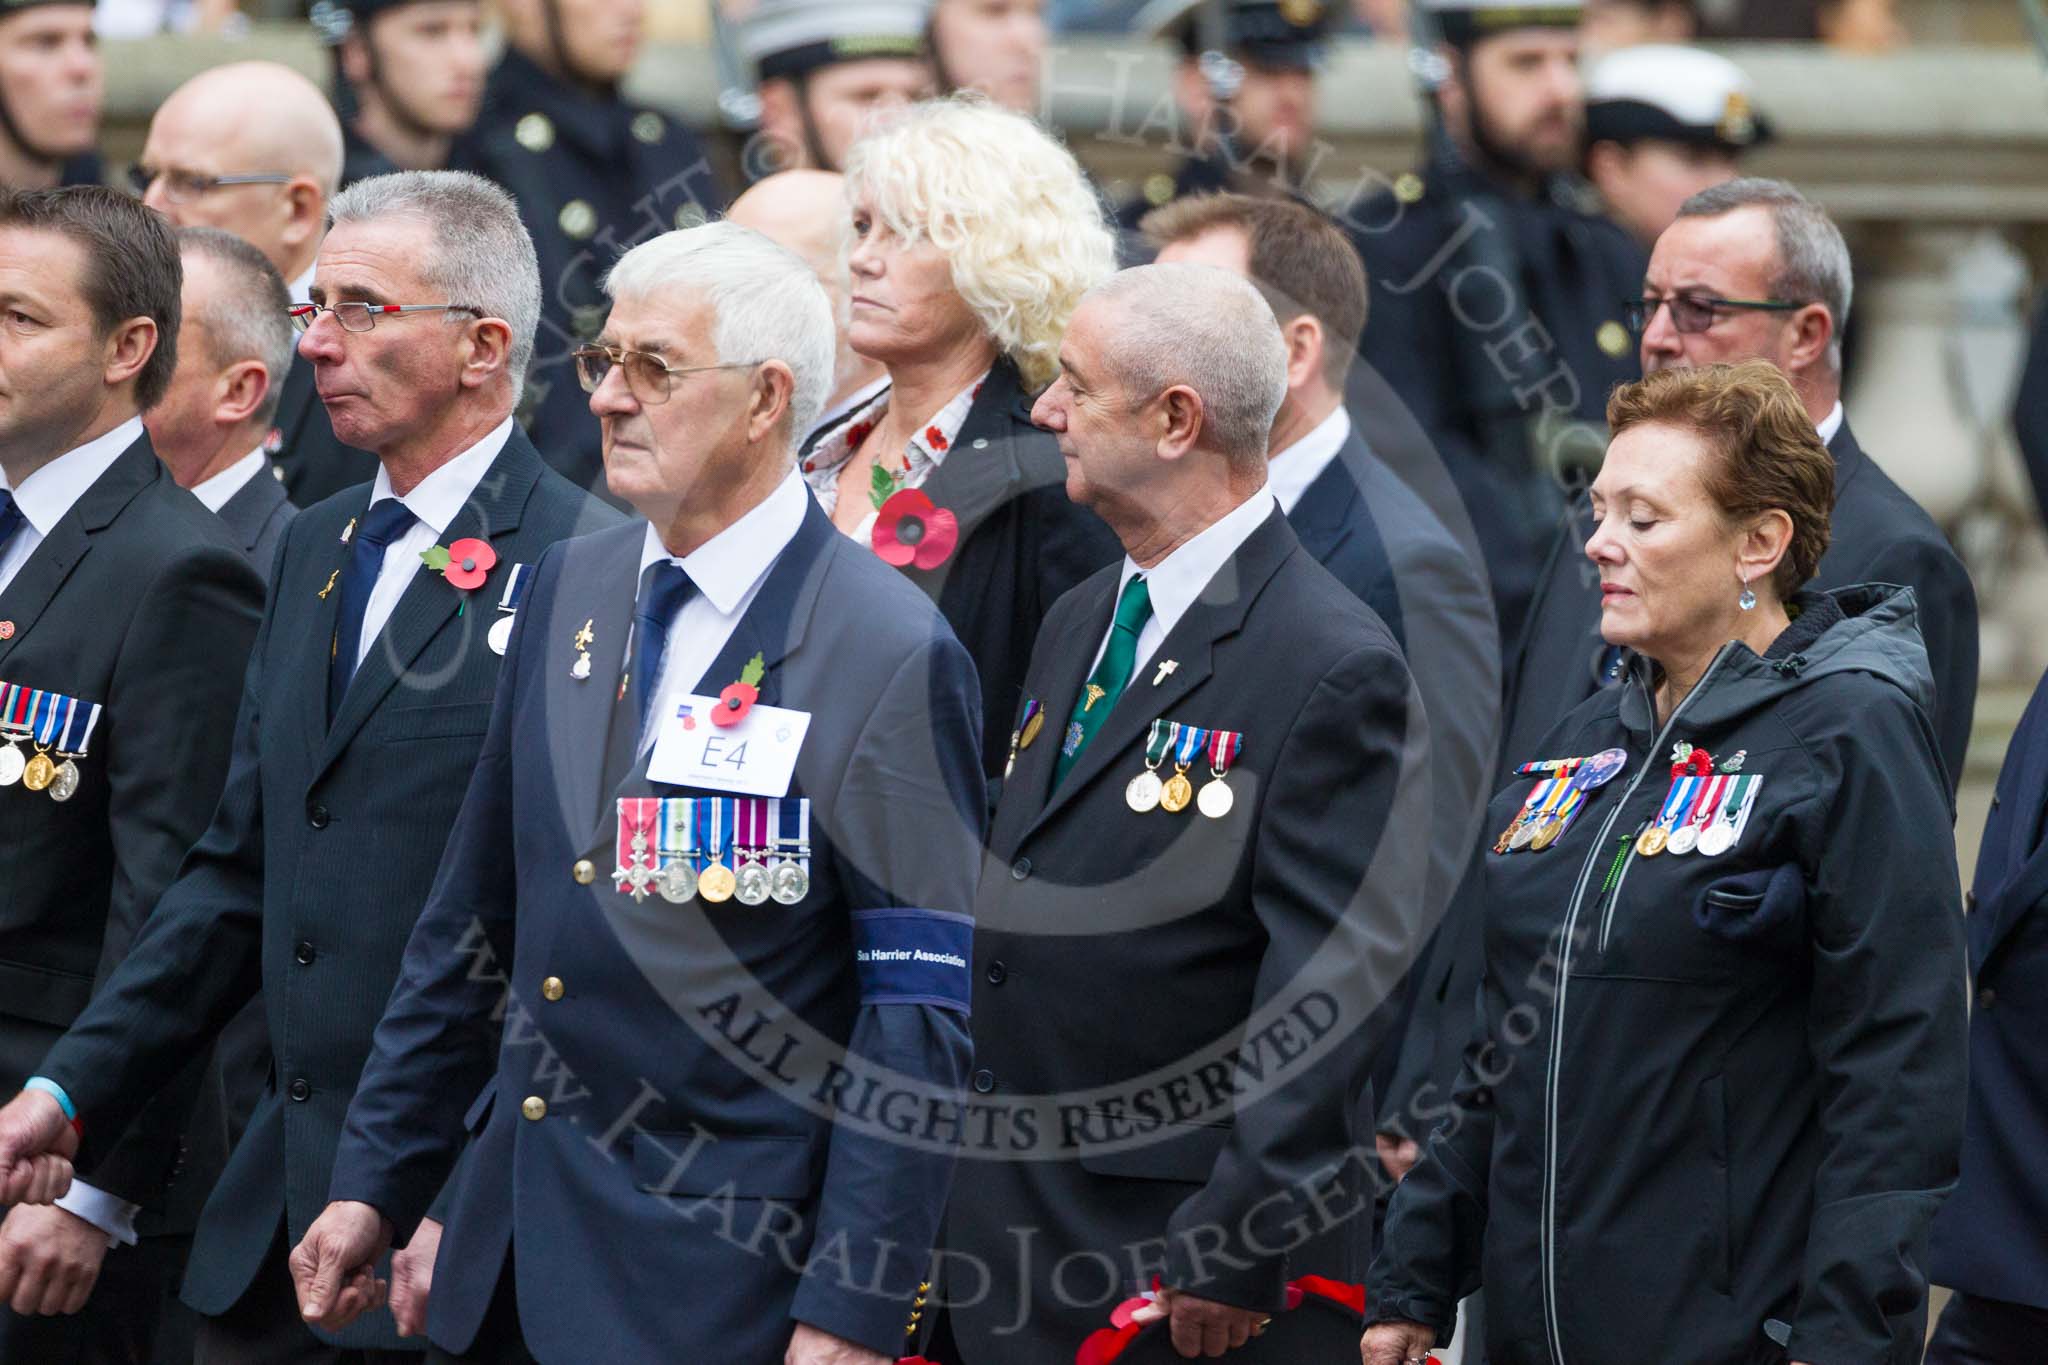 Remembrance Sunday at the Cenotaph 2015: Group E4, Sea Harrier Association.
Cenotaph, Whitehall, London SW1,
London,
Greater London,
United Kingdom,
on 08 November 2015 at 11:59, image #836